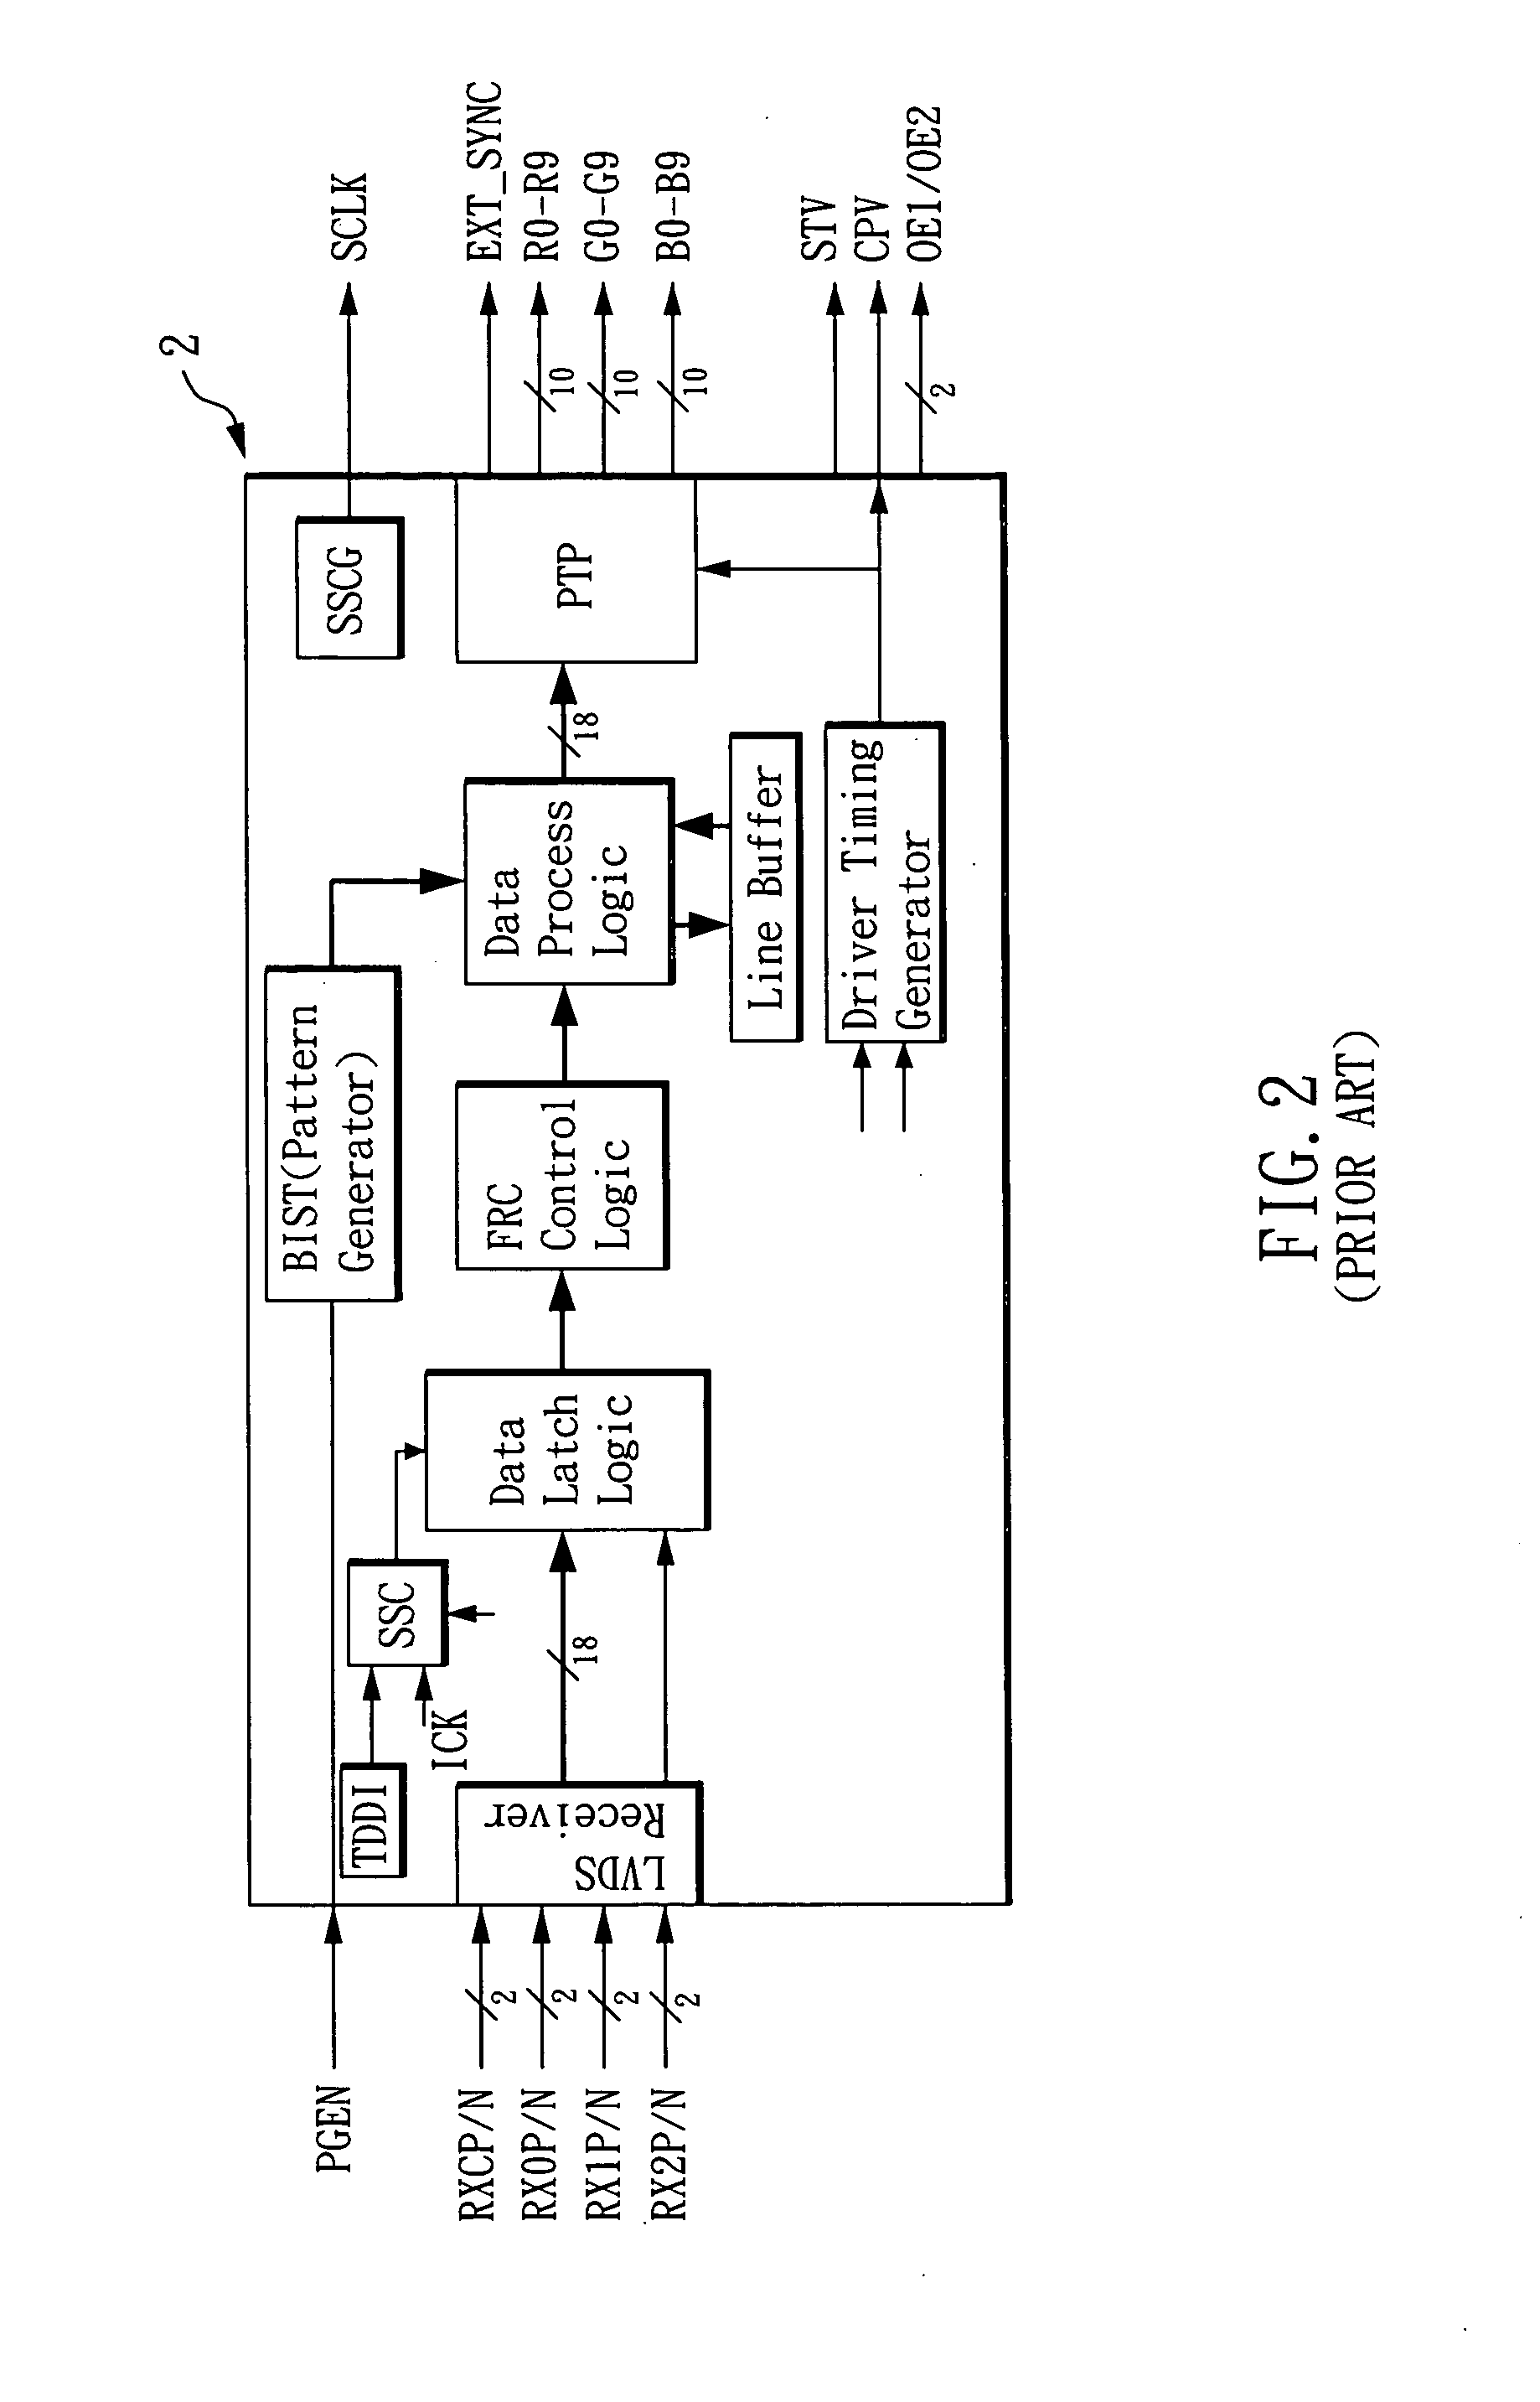 Method for improving the EMI performance of an LCD device